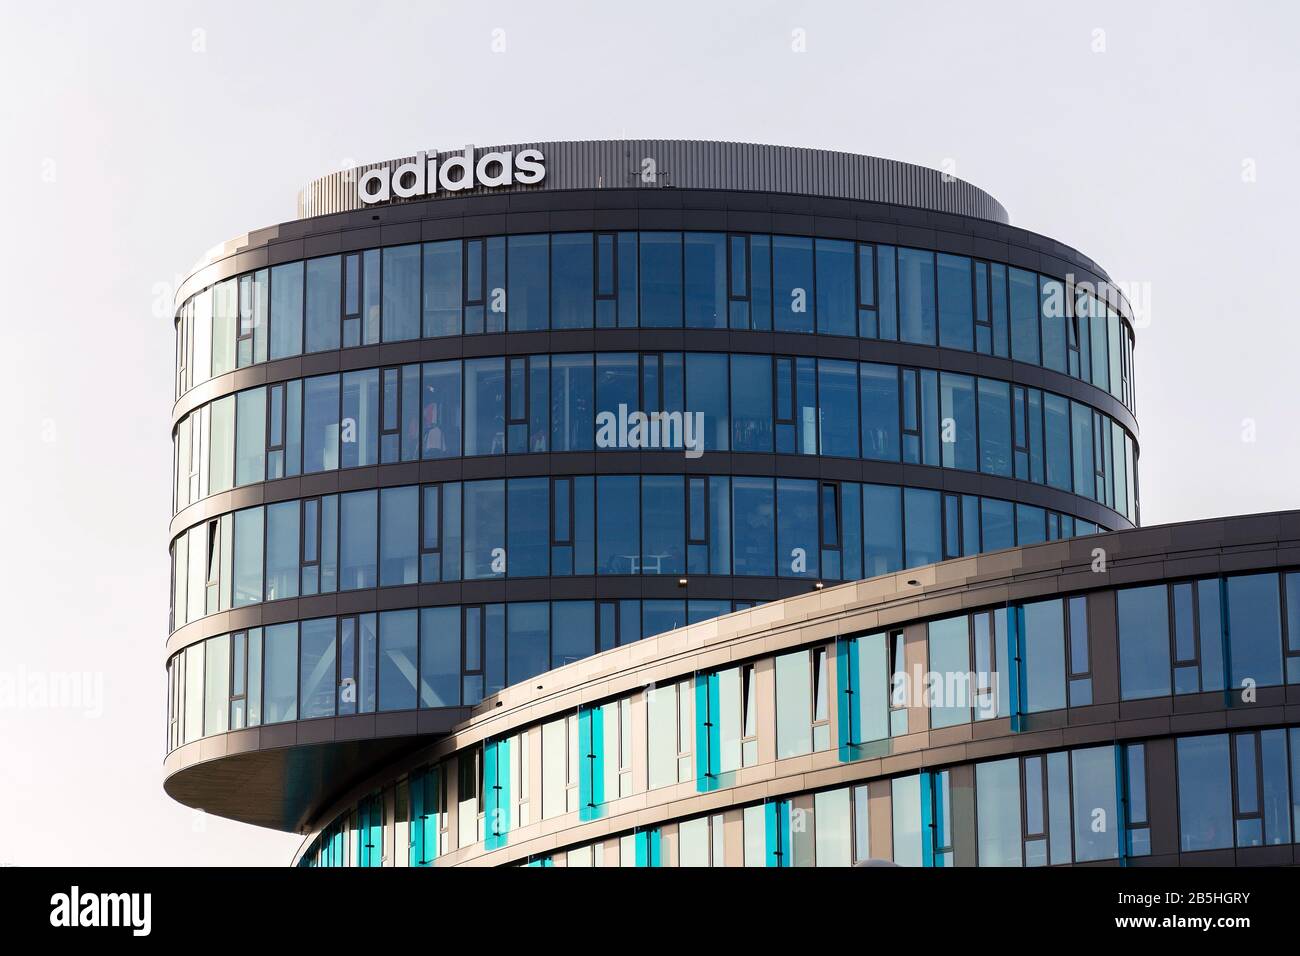 Adidas headquarters stock photography and images - Alamy